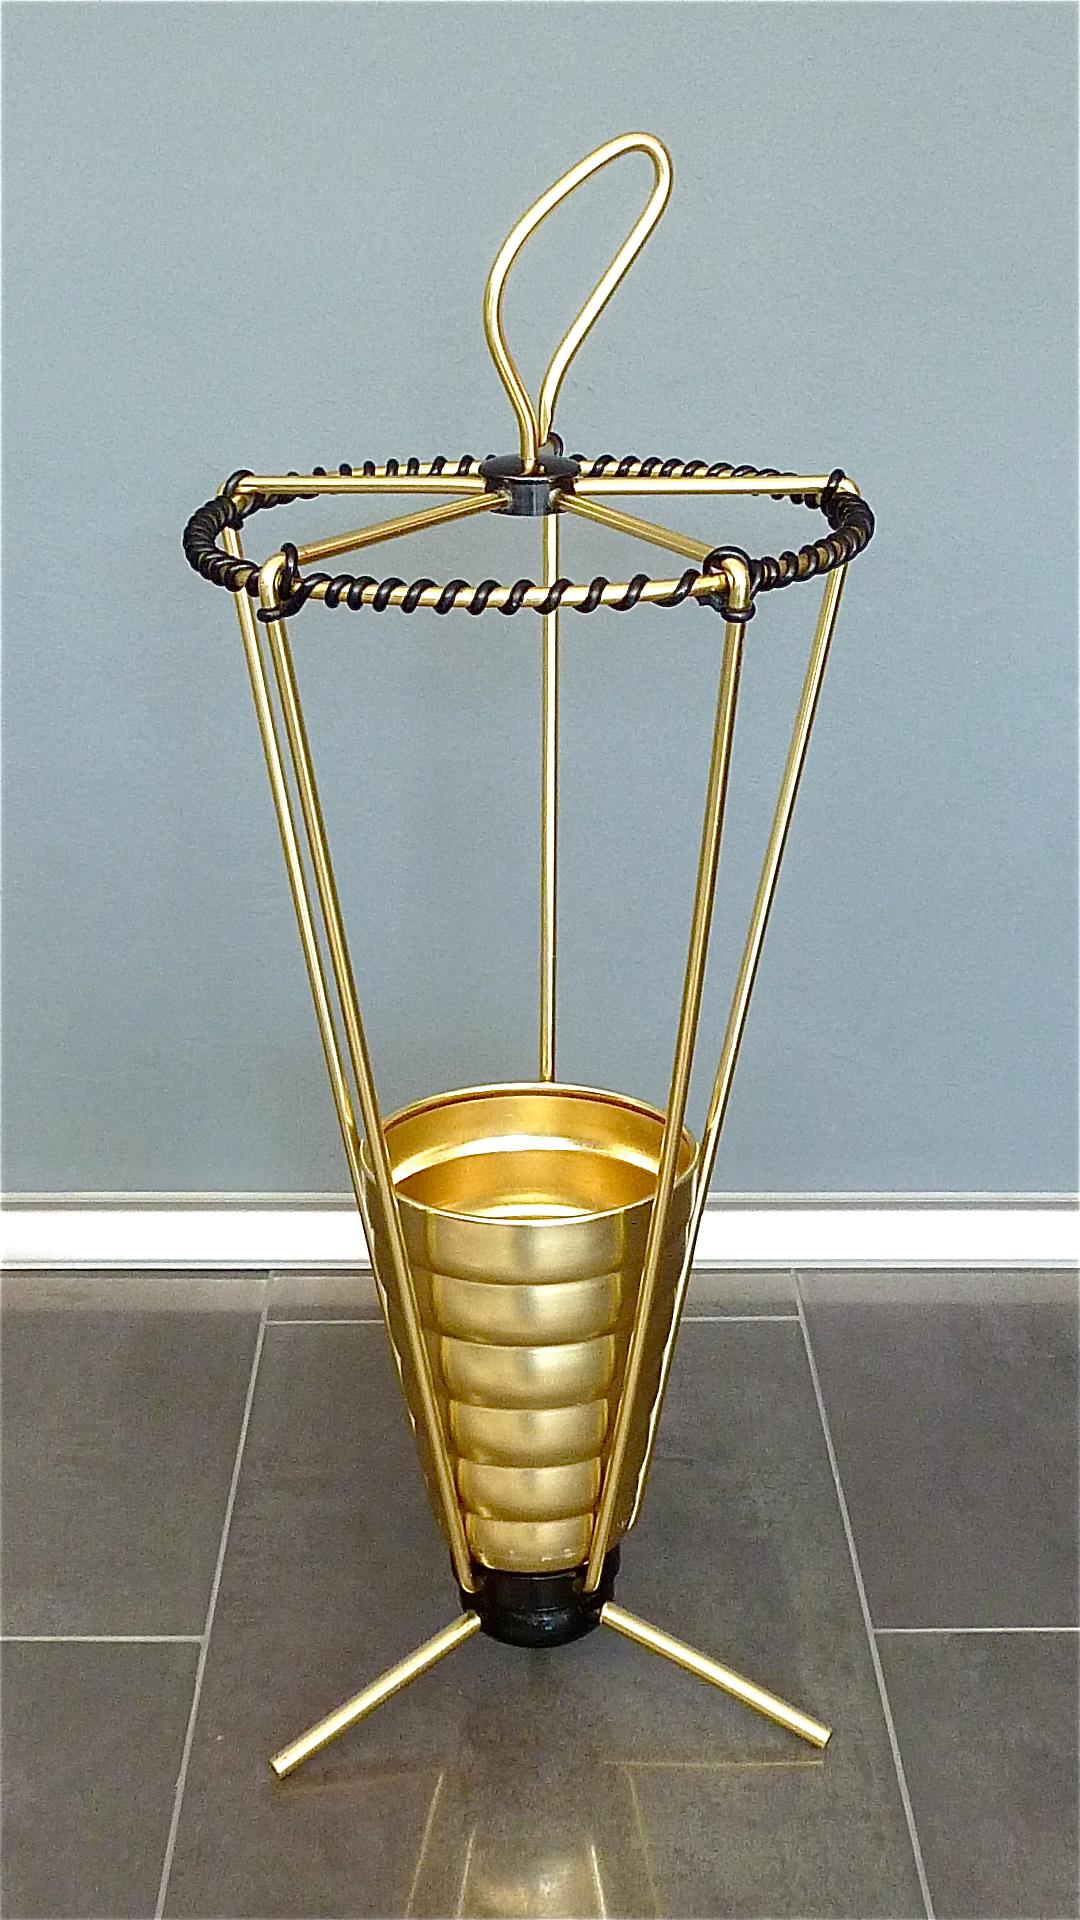 Midcentury golden anodized aluminum umbrella stand with black enameled iron weighted tripod sputnik base, a golden beaker as raindrop-catcher and black plastic cord wrapping around the rim, Italy, circa 1955. Very good original condition, minor